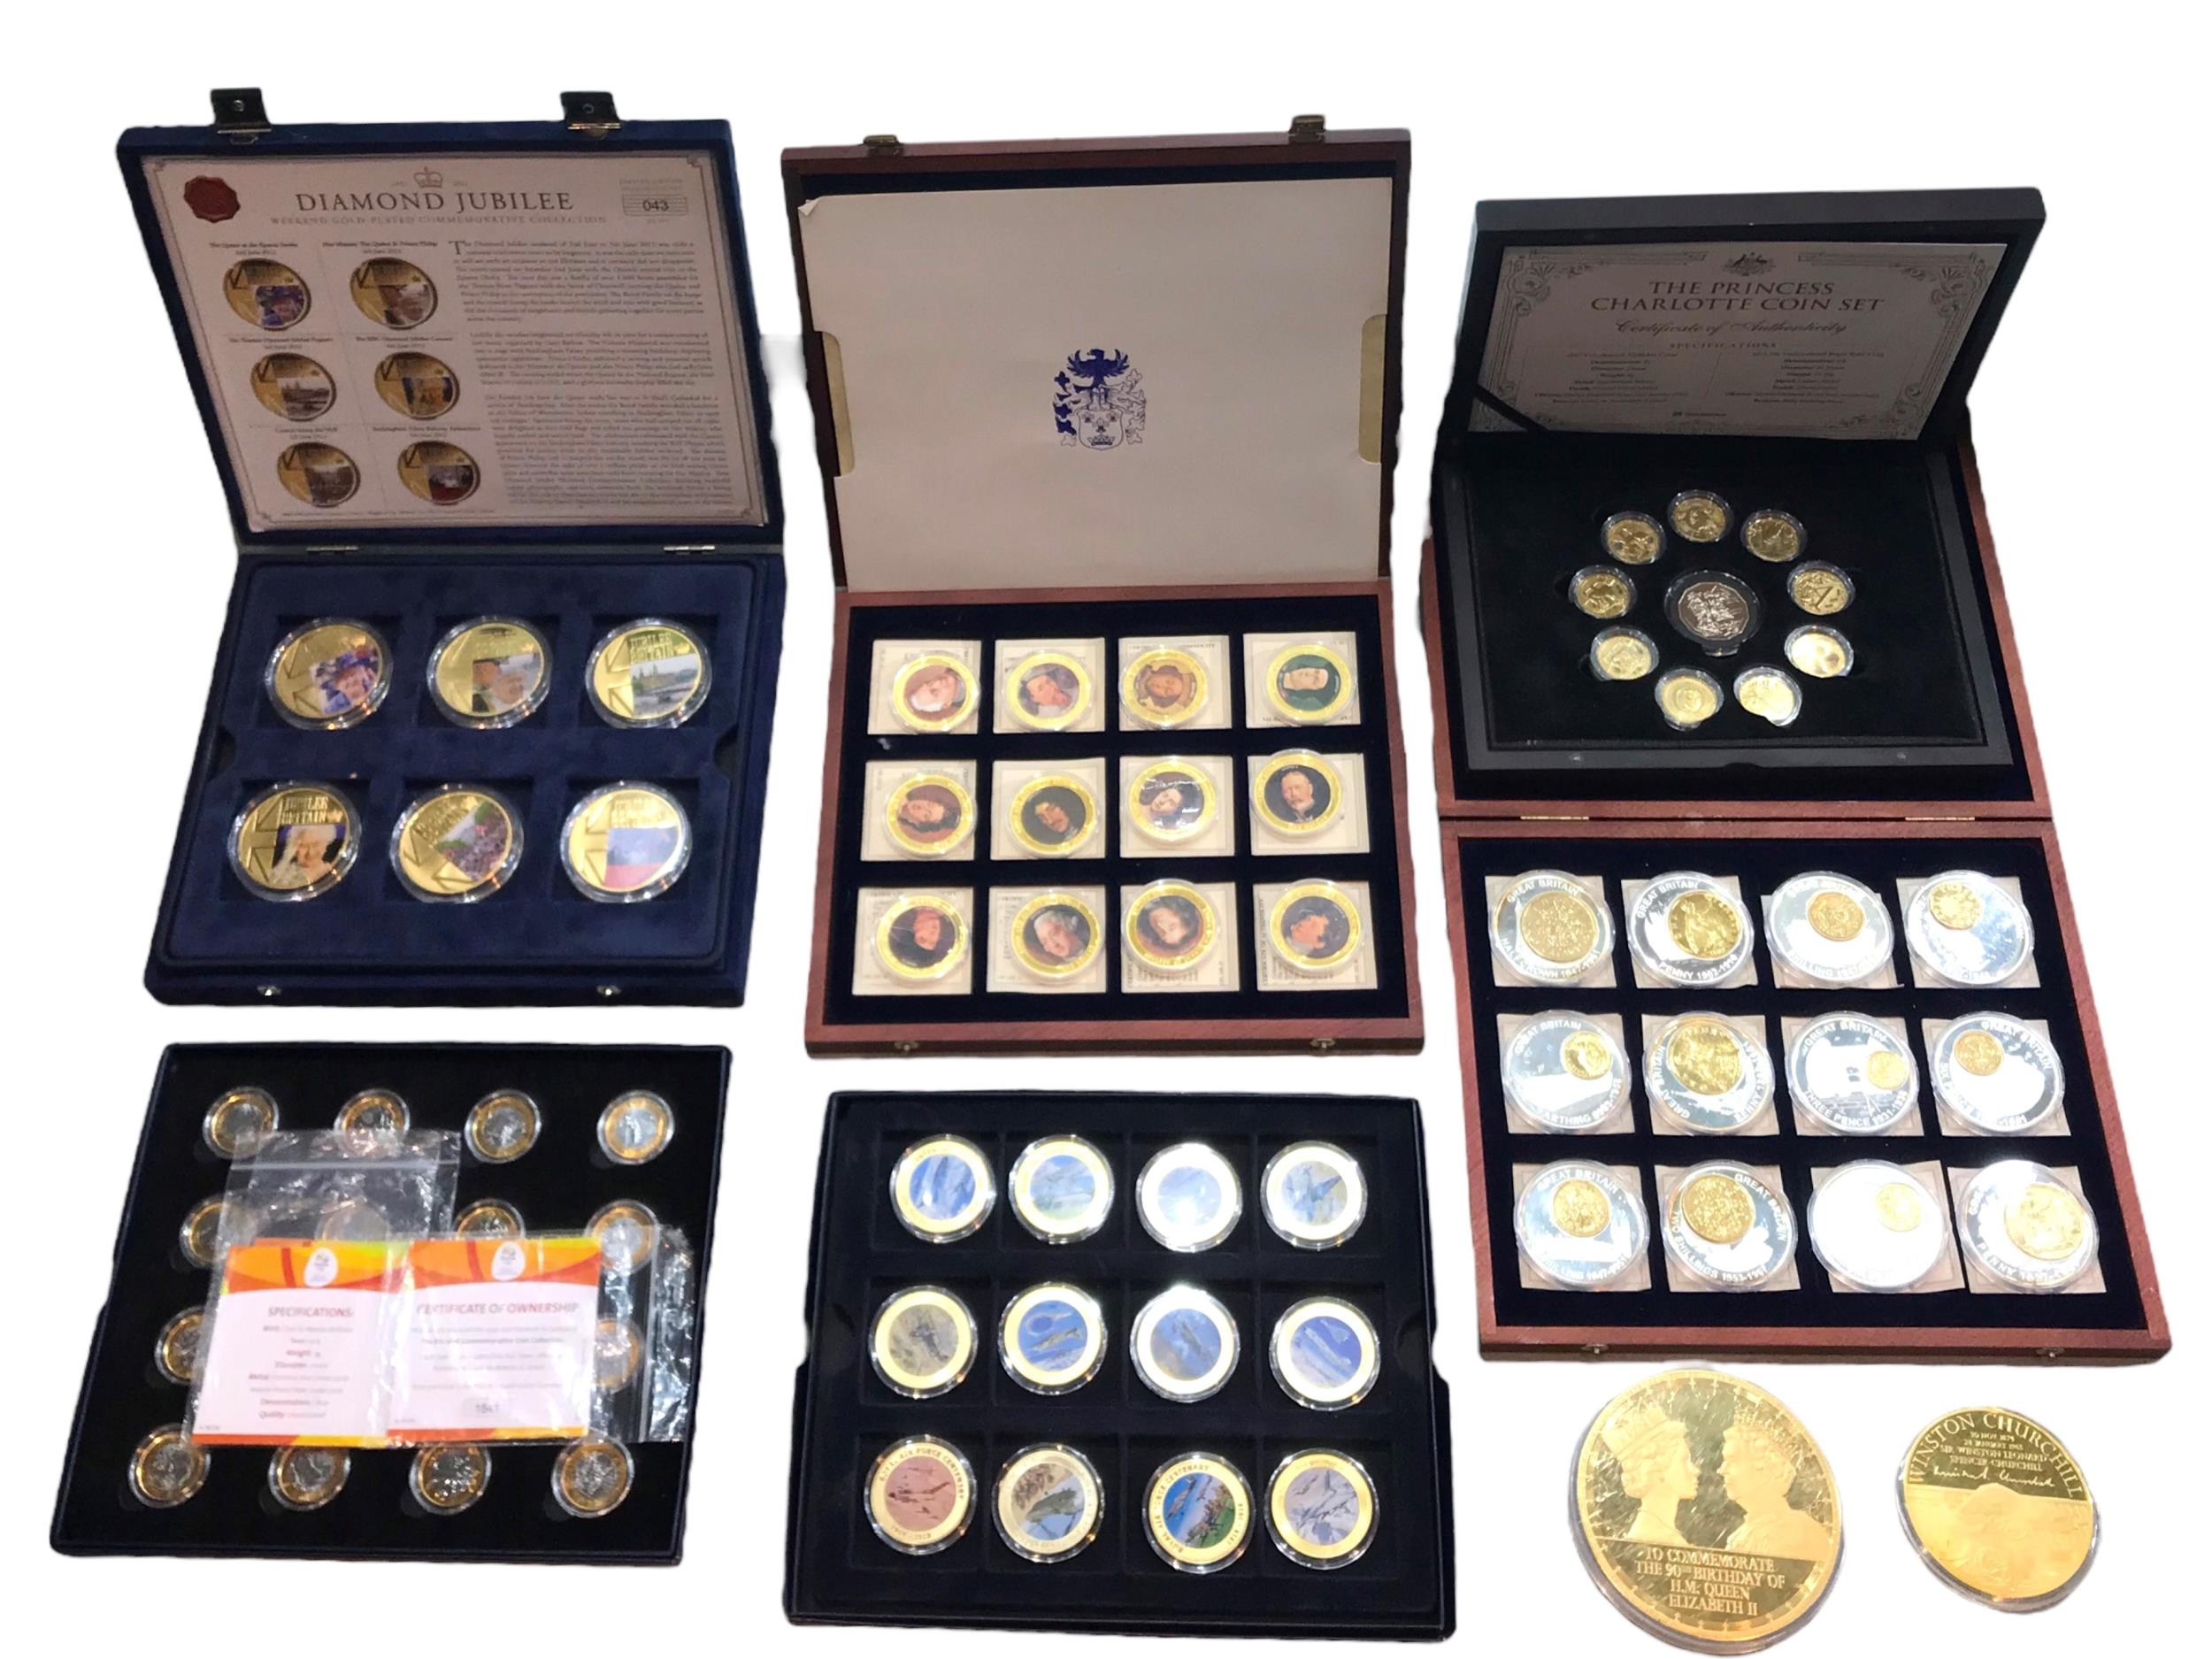 WESTMINSTER & WINDSOR MINT, A COLLECTION OF SIX CASED COMMEMORATIVE COIN SETS AND TWO LARGE GOLD